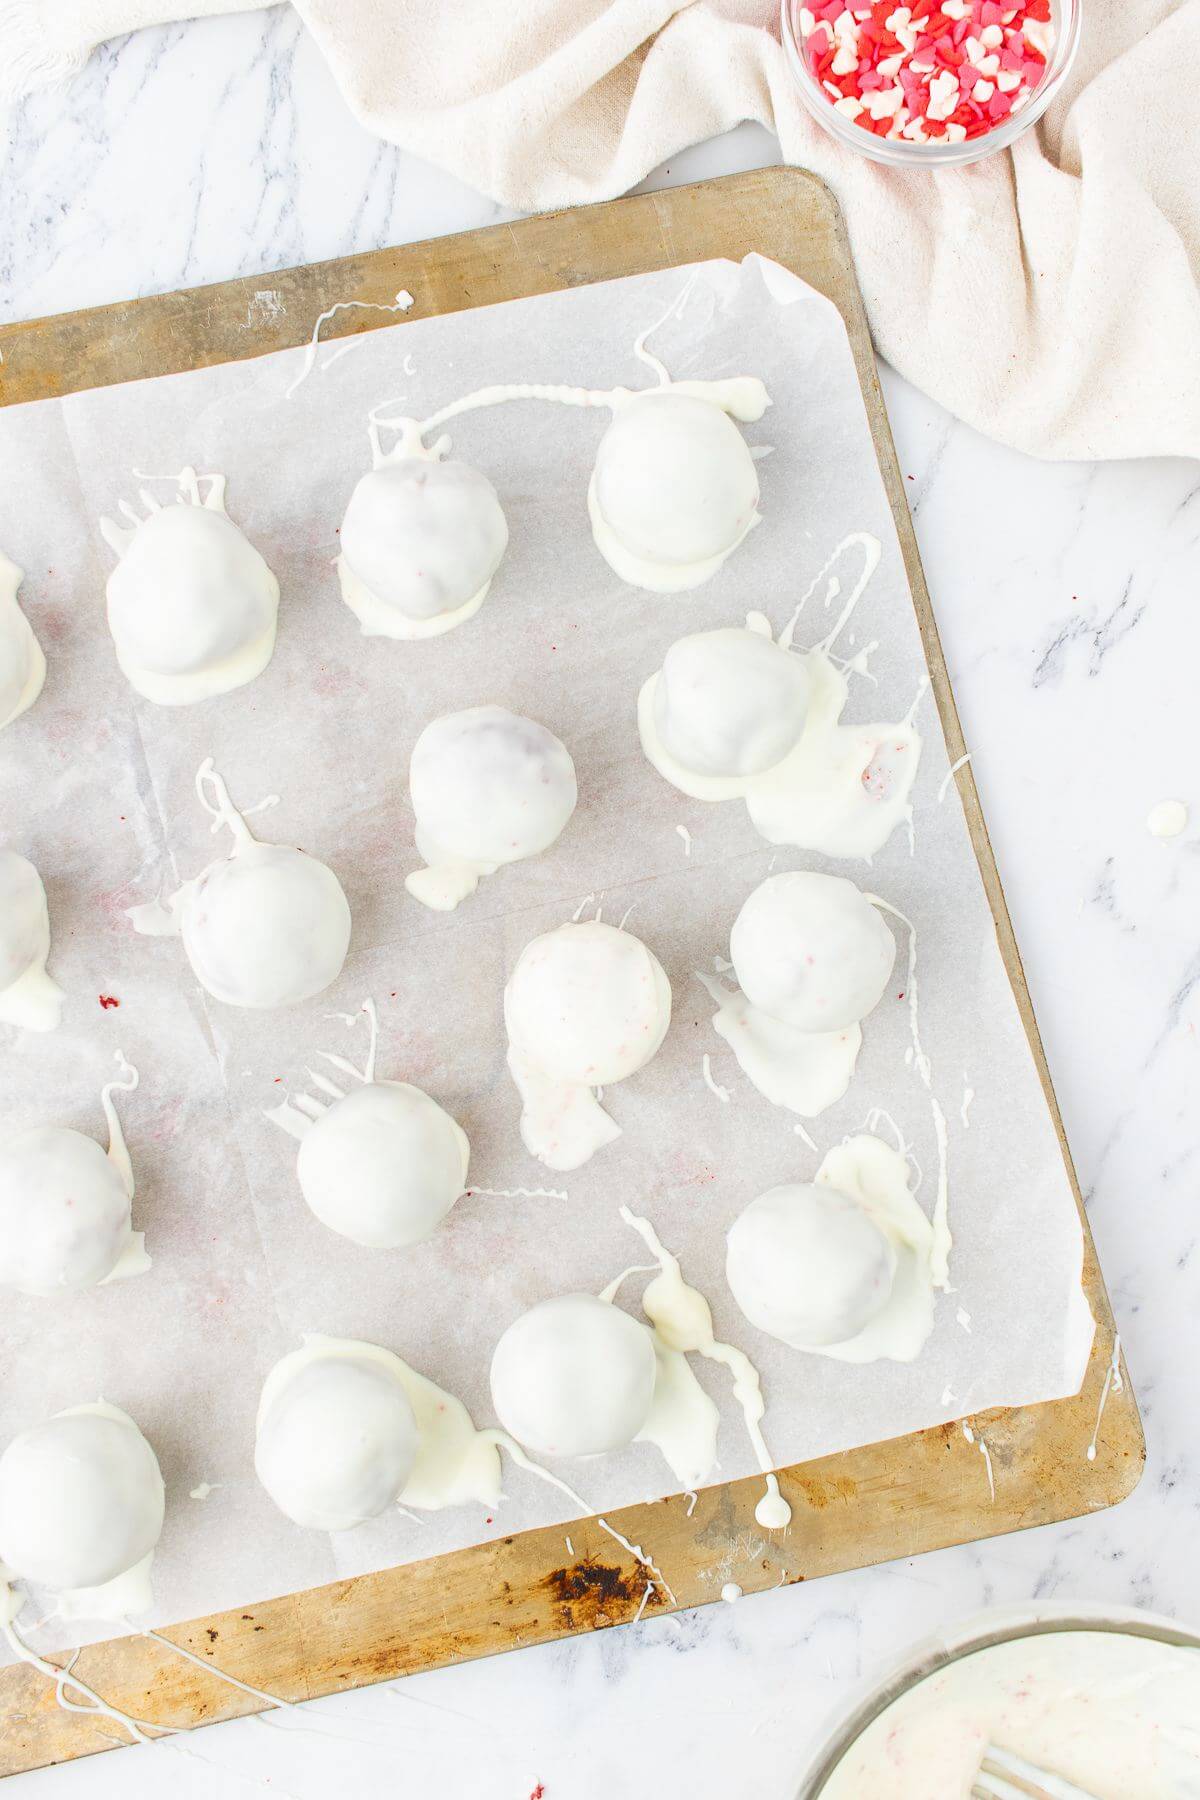 White iced cake pops cover parchment paper on a baking sheet.